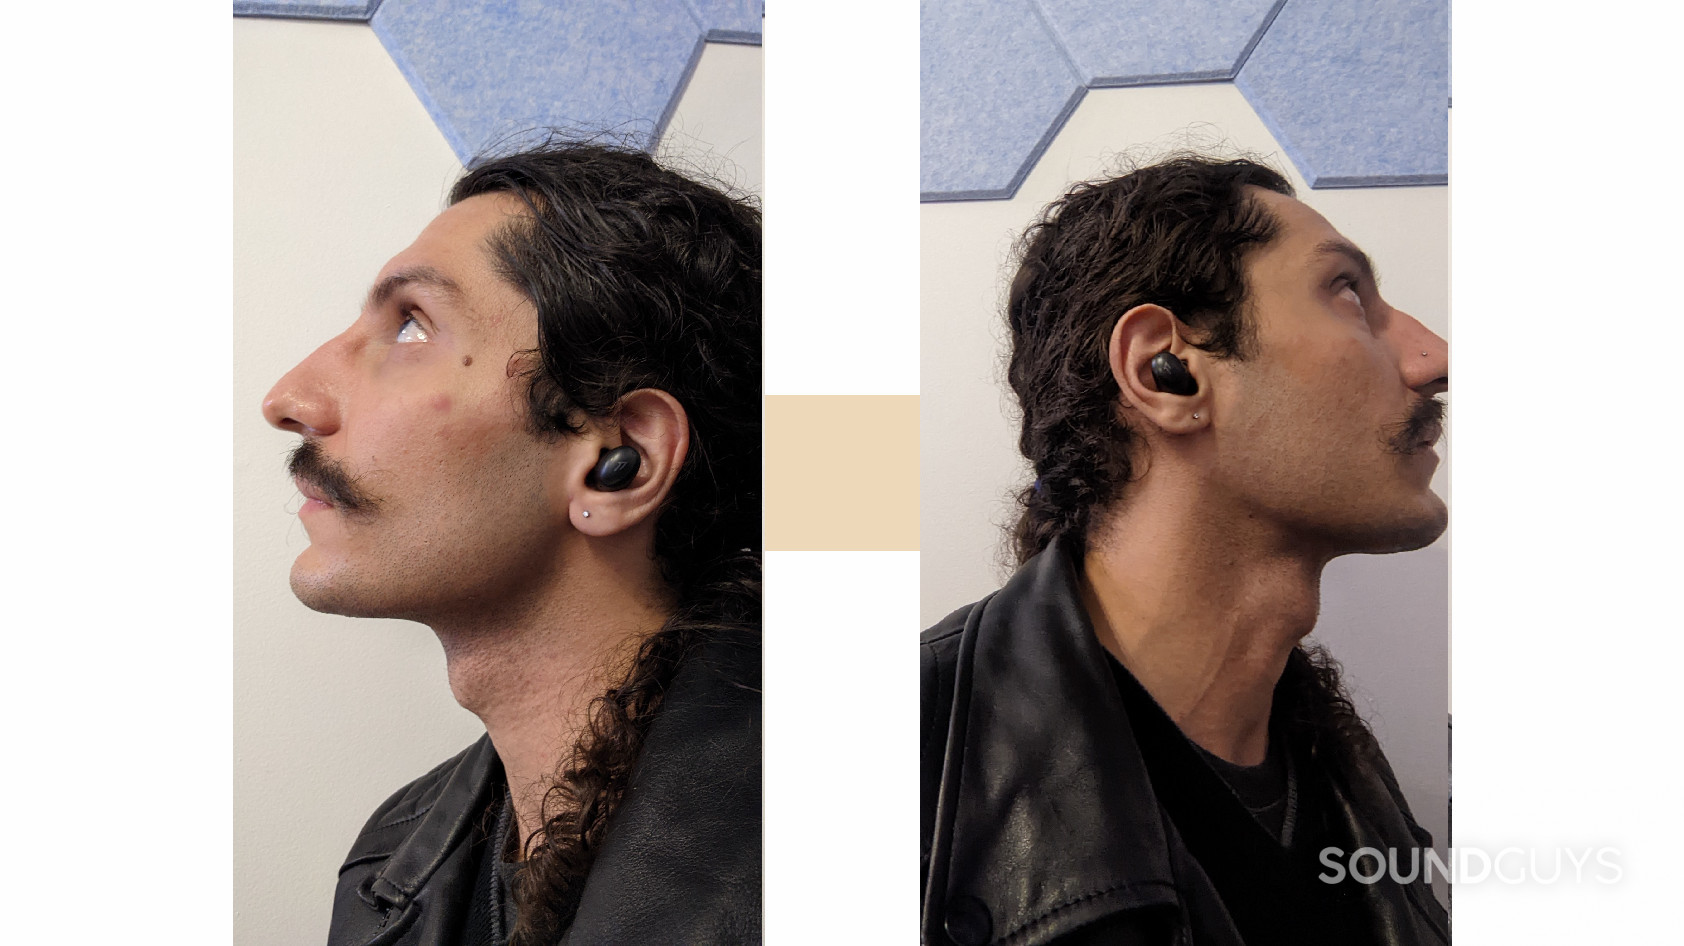 The 1MORE ColorBuds 2 shown in two images in a person's left ear on the left and in the right ear on the right.